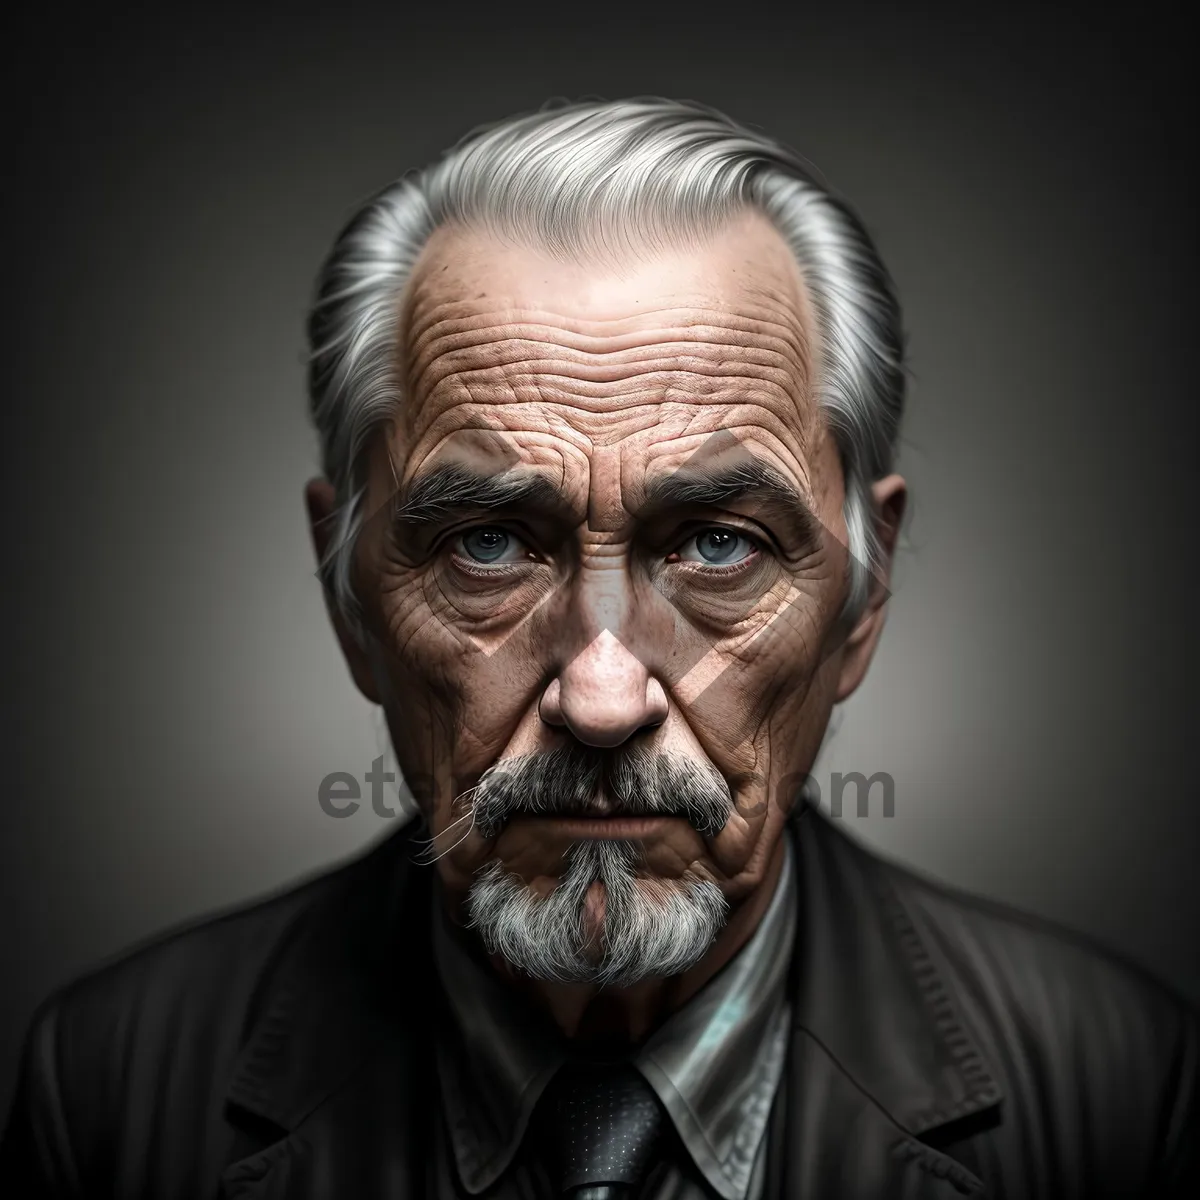 Picture of Serious elderly gentleman with glasses